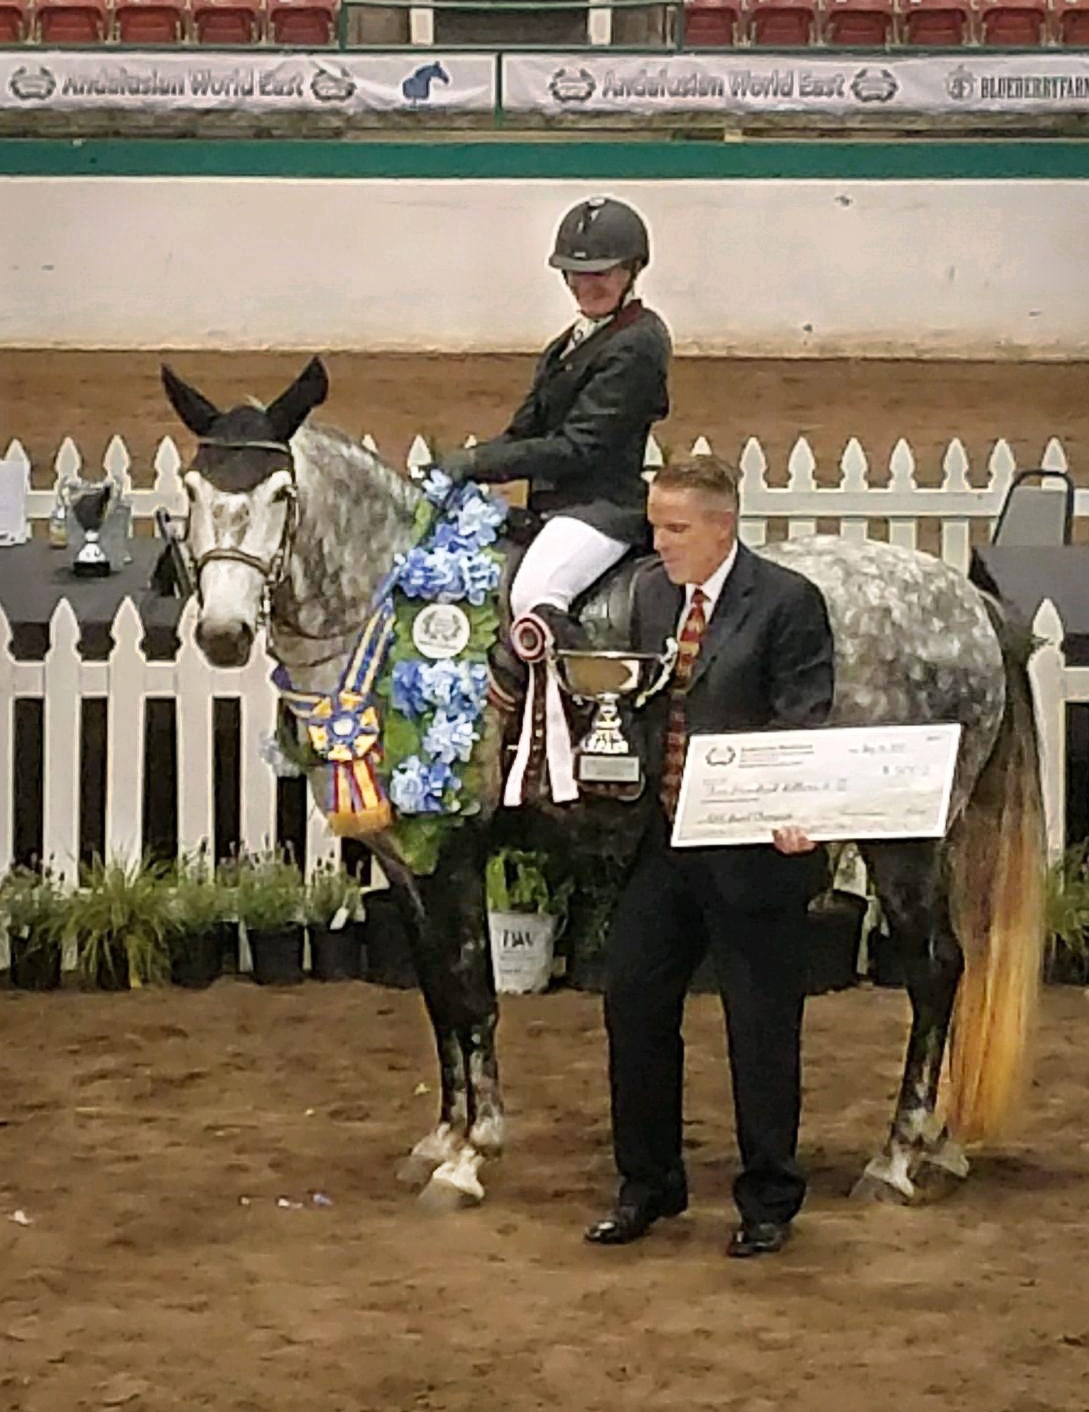 DEM Alegre gray Lusitano mare after winning Grand Champion of Andalusian World East